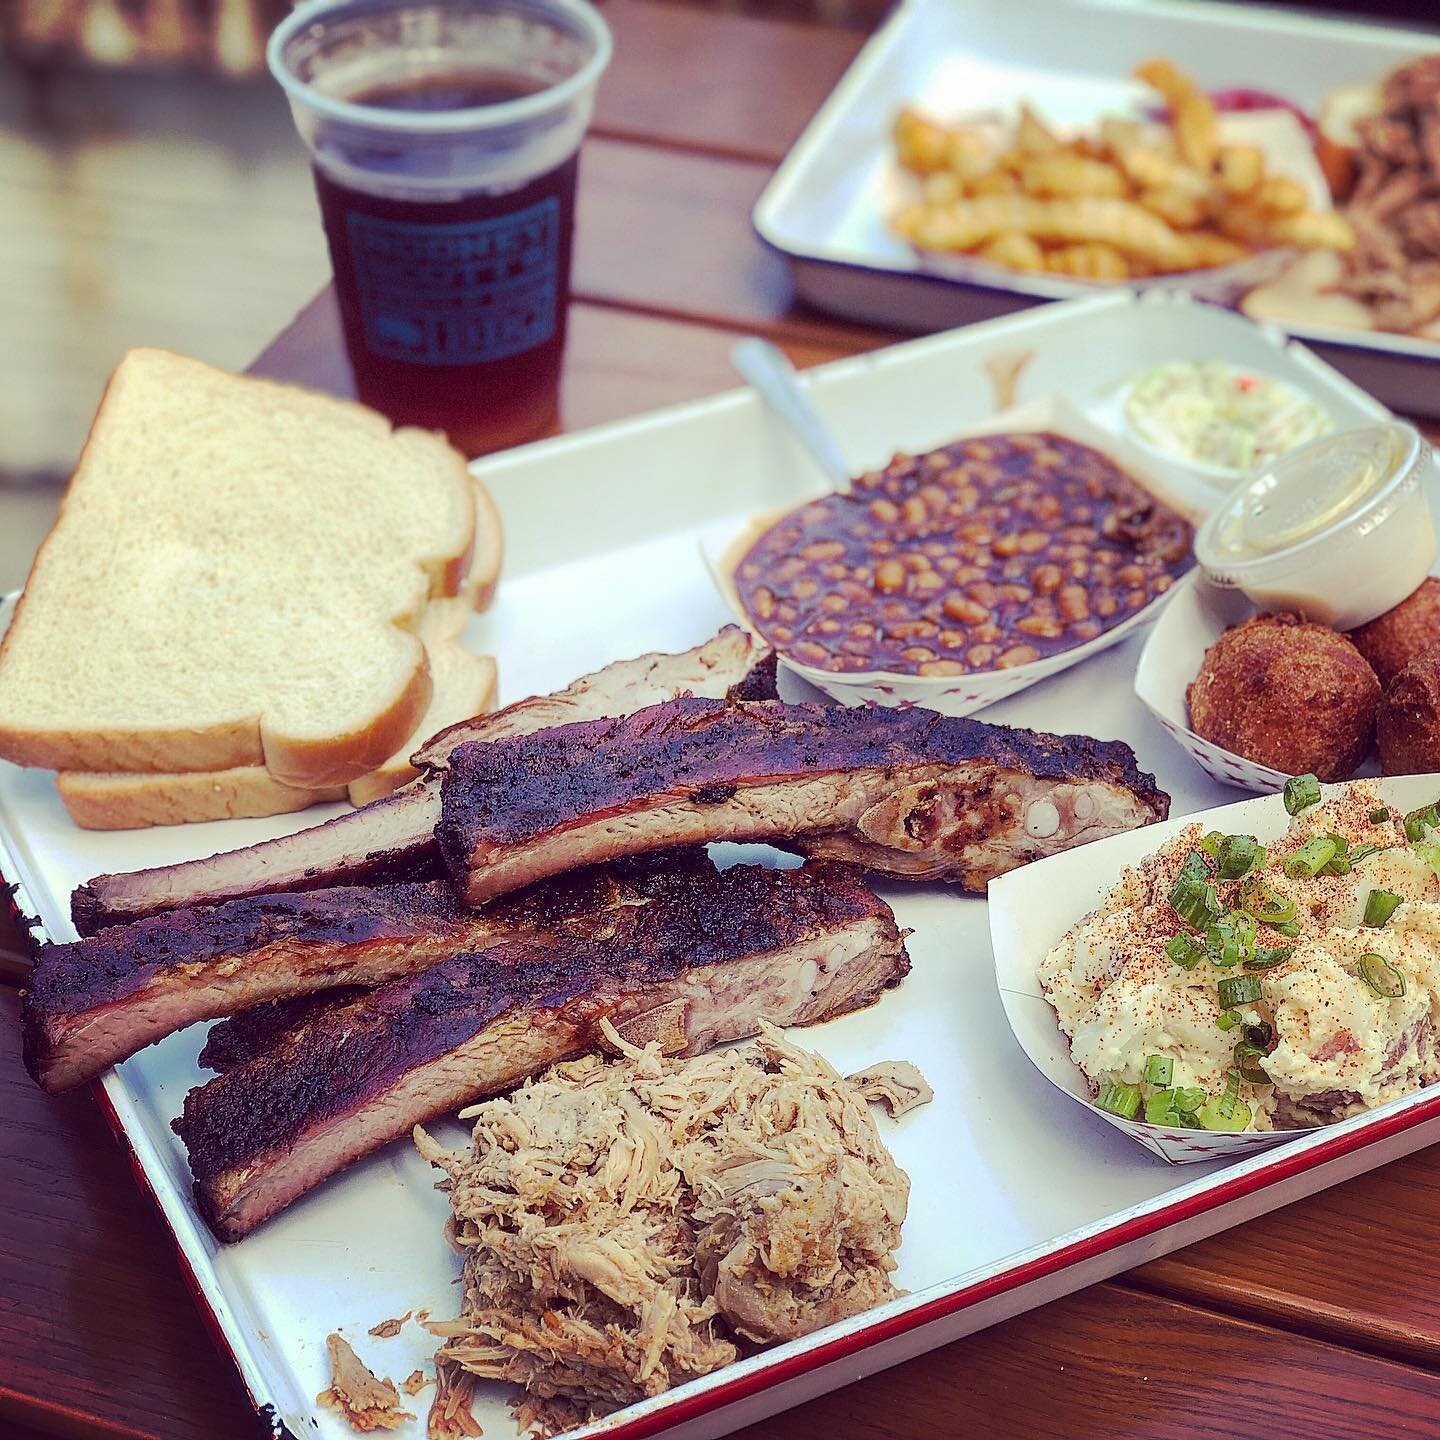 The Charleston #bbq scene gets a 💯 from me @lewisbarbecue and @rodneyscottsbbq keep it up and can&rsquo;t wait to come back sans 😷